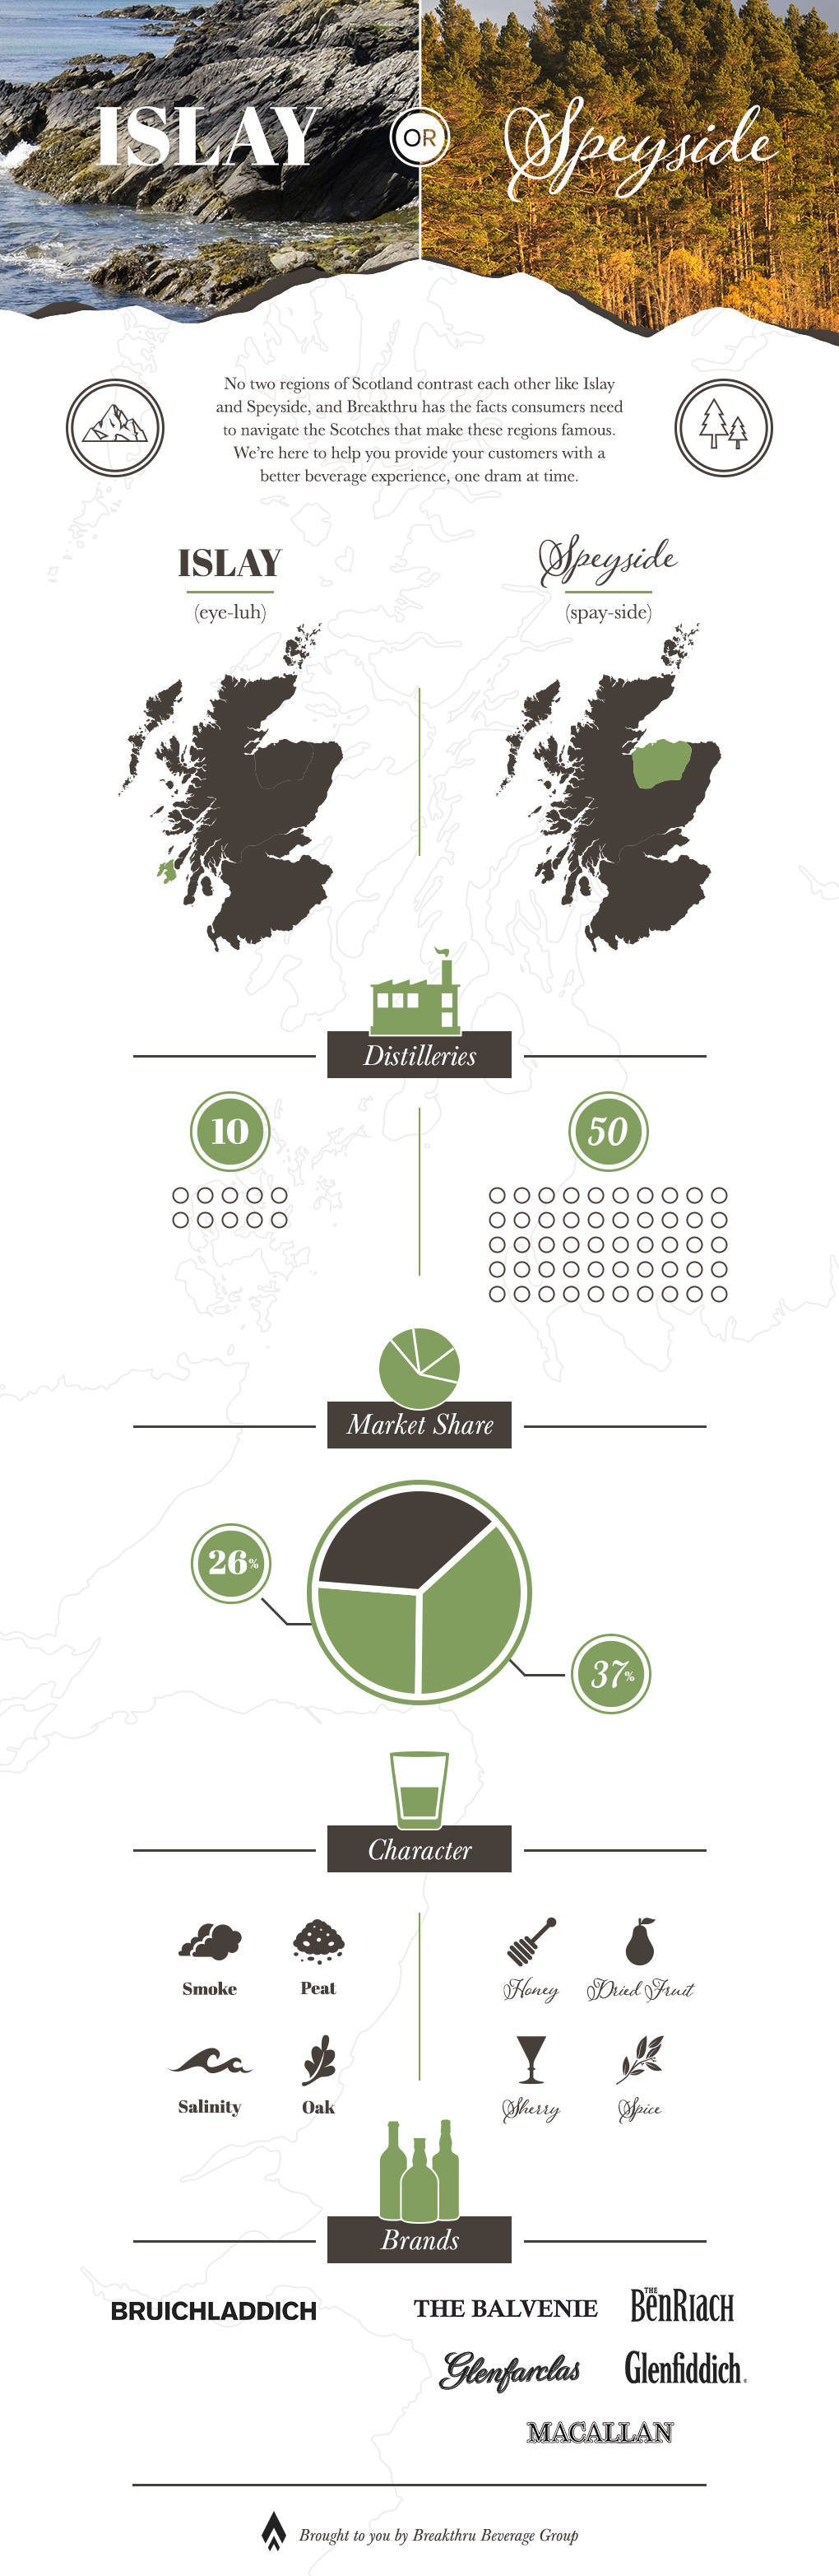 MN - Islay or Speyside Infographic